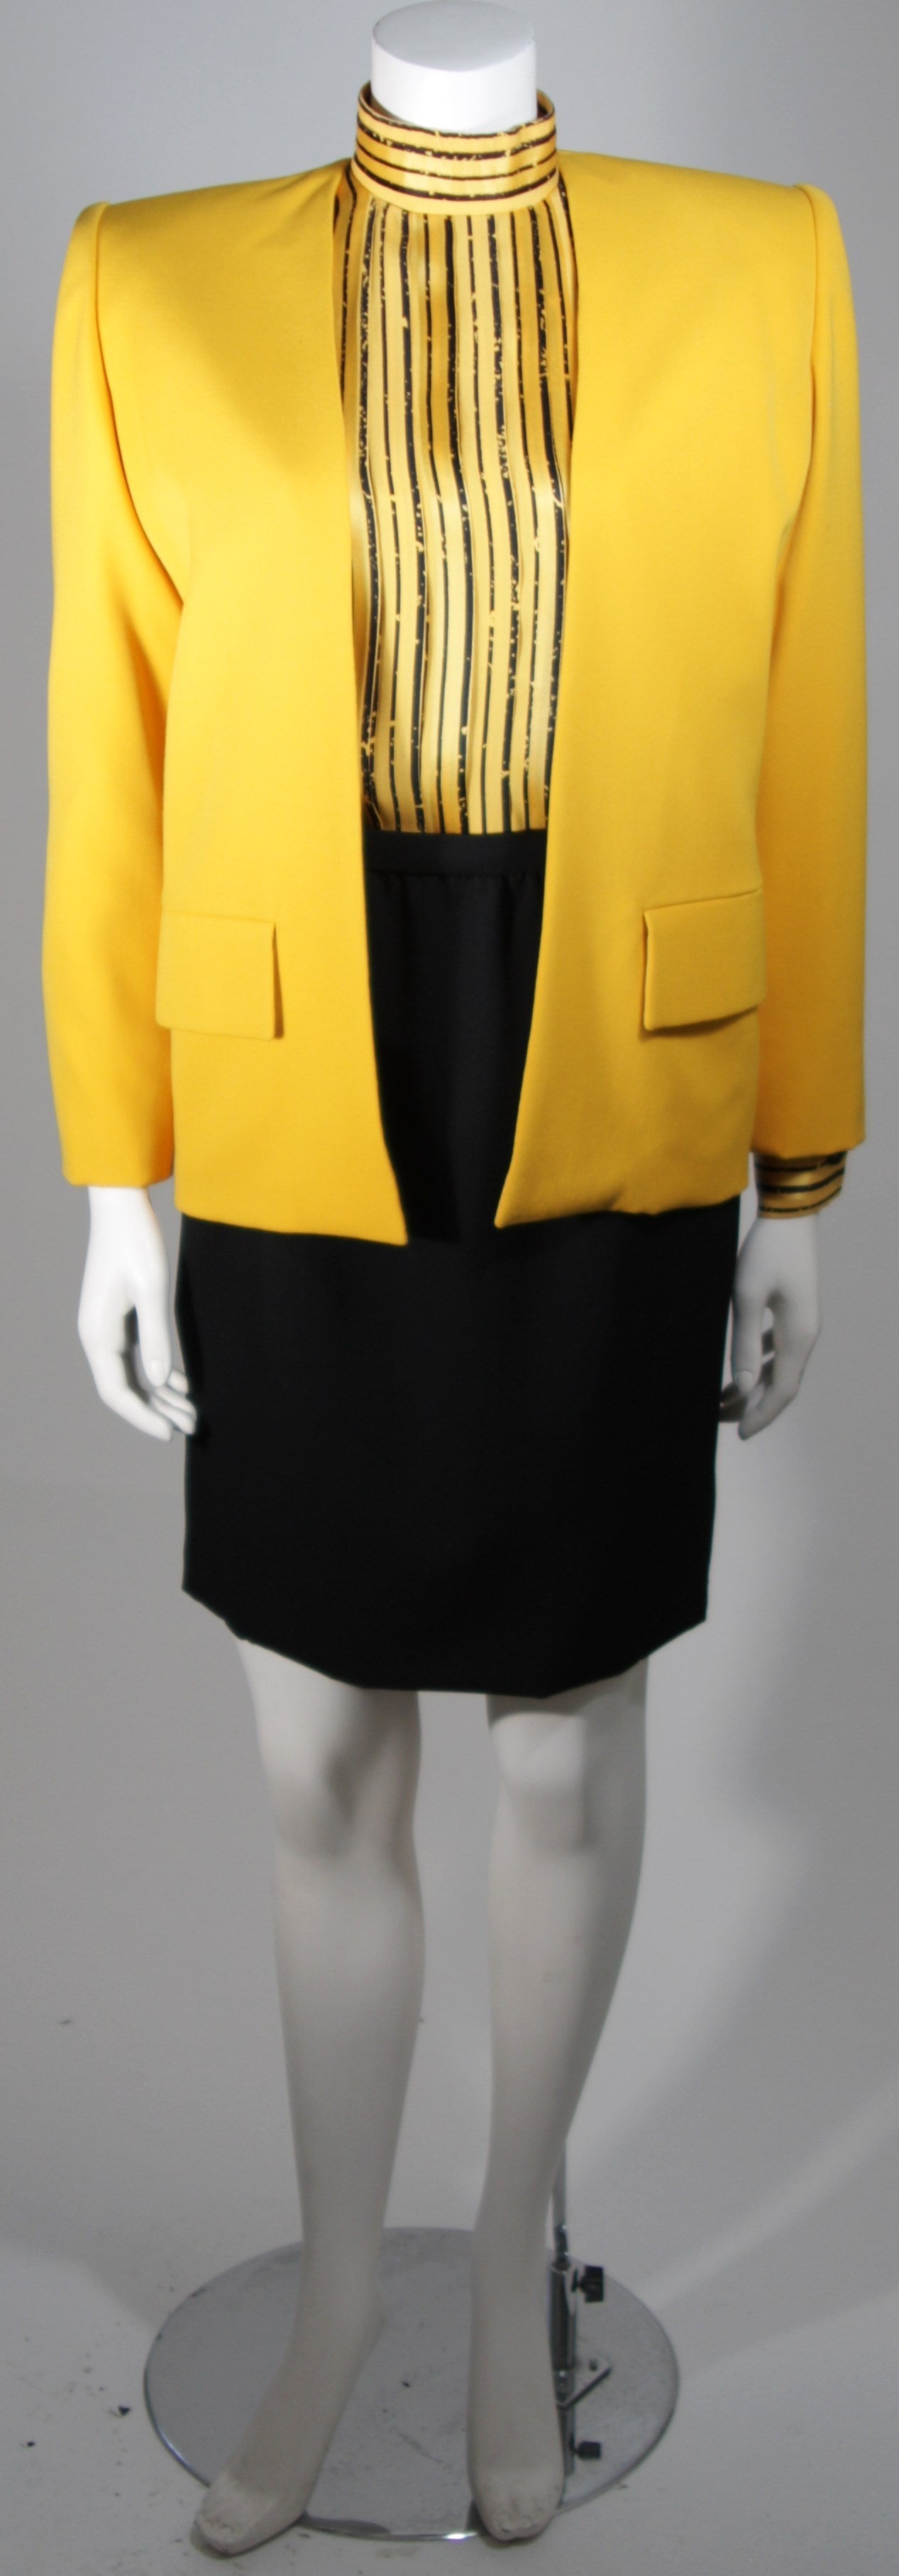 This Galanos Couture design is available for viewing at our Beverly Hills Boutique. We offer a large selection of evening gowns and luxury garments.

This suit features three pieces, the skirt and jacket are composed of a wool. The yellow